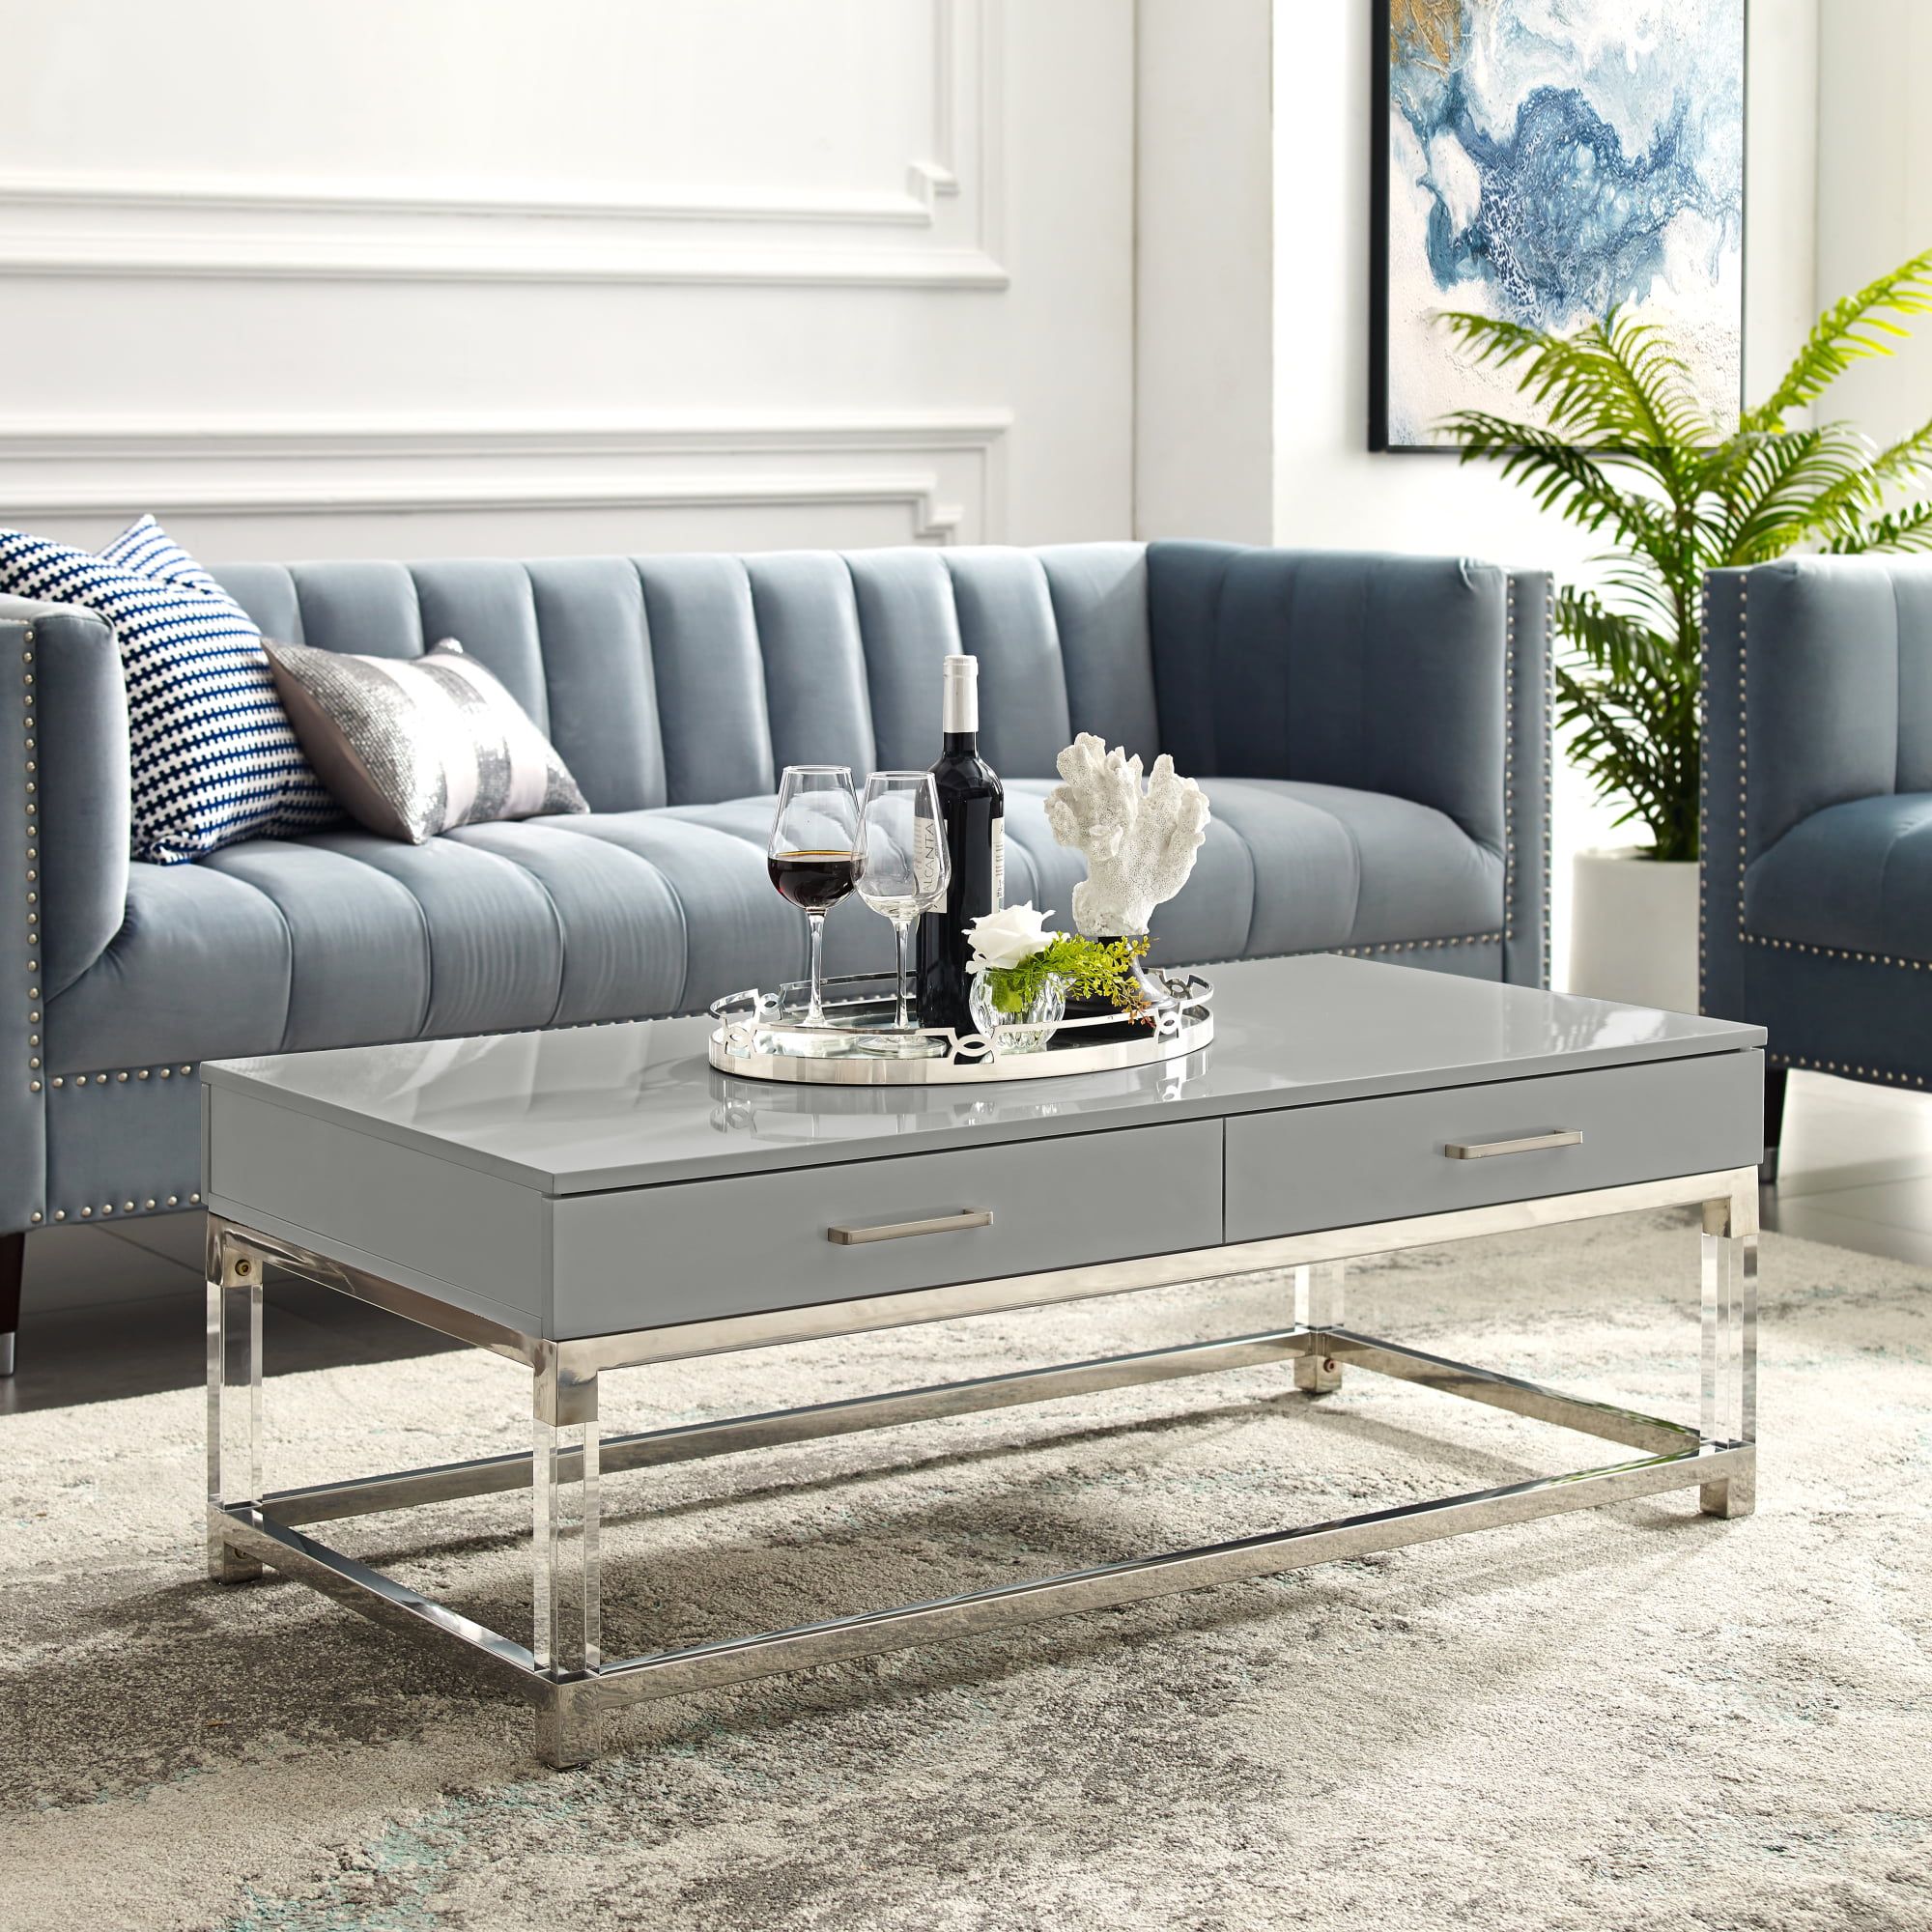 Ebbe Light Grey Chrome Coffee Table – High Gloss Finish, Acrylic Leg,  Stainless Steel Base, 2 Drawers – Walmart Throughout Glossy Finished Metal Coffee Tables (Photo 4 of 15)